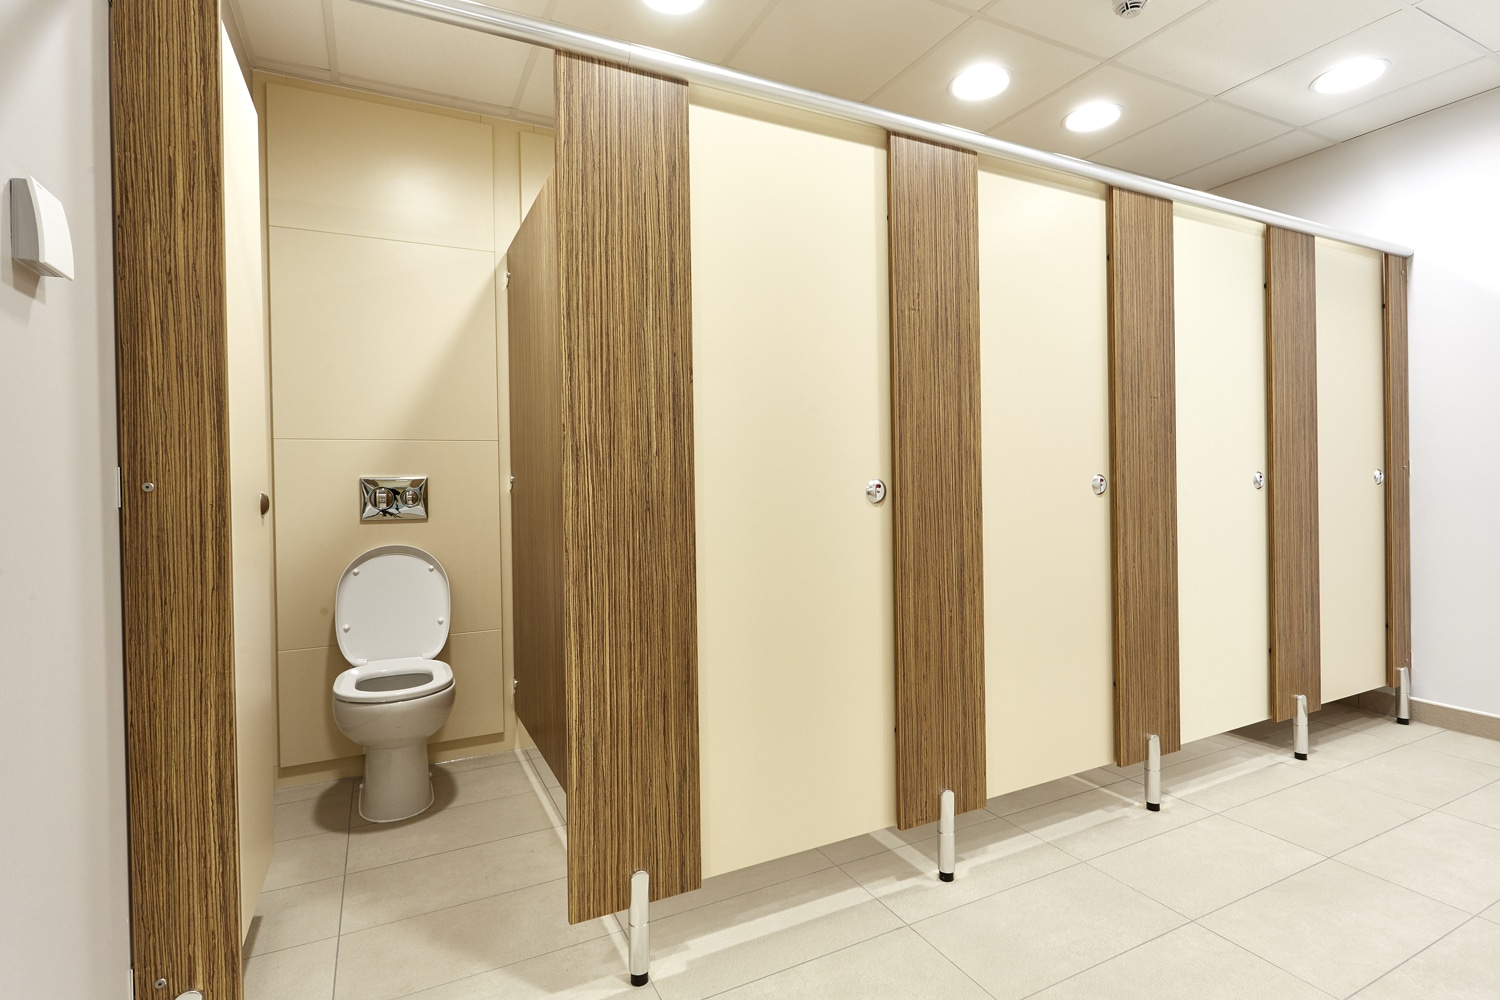 New washrooms for Global Food Producer